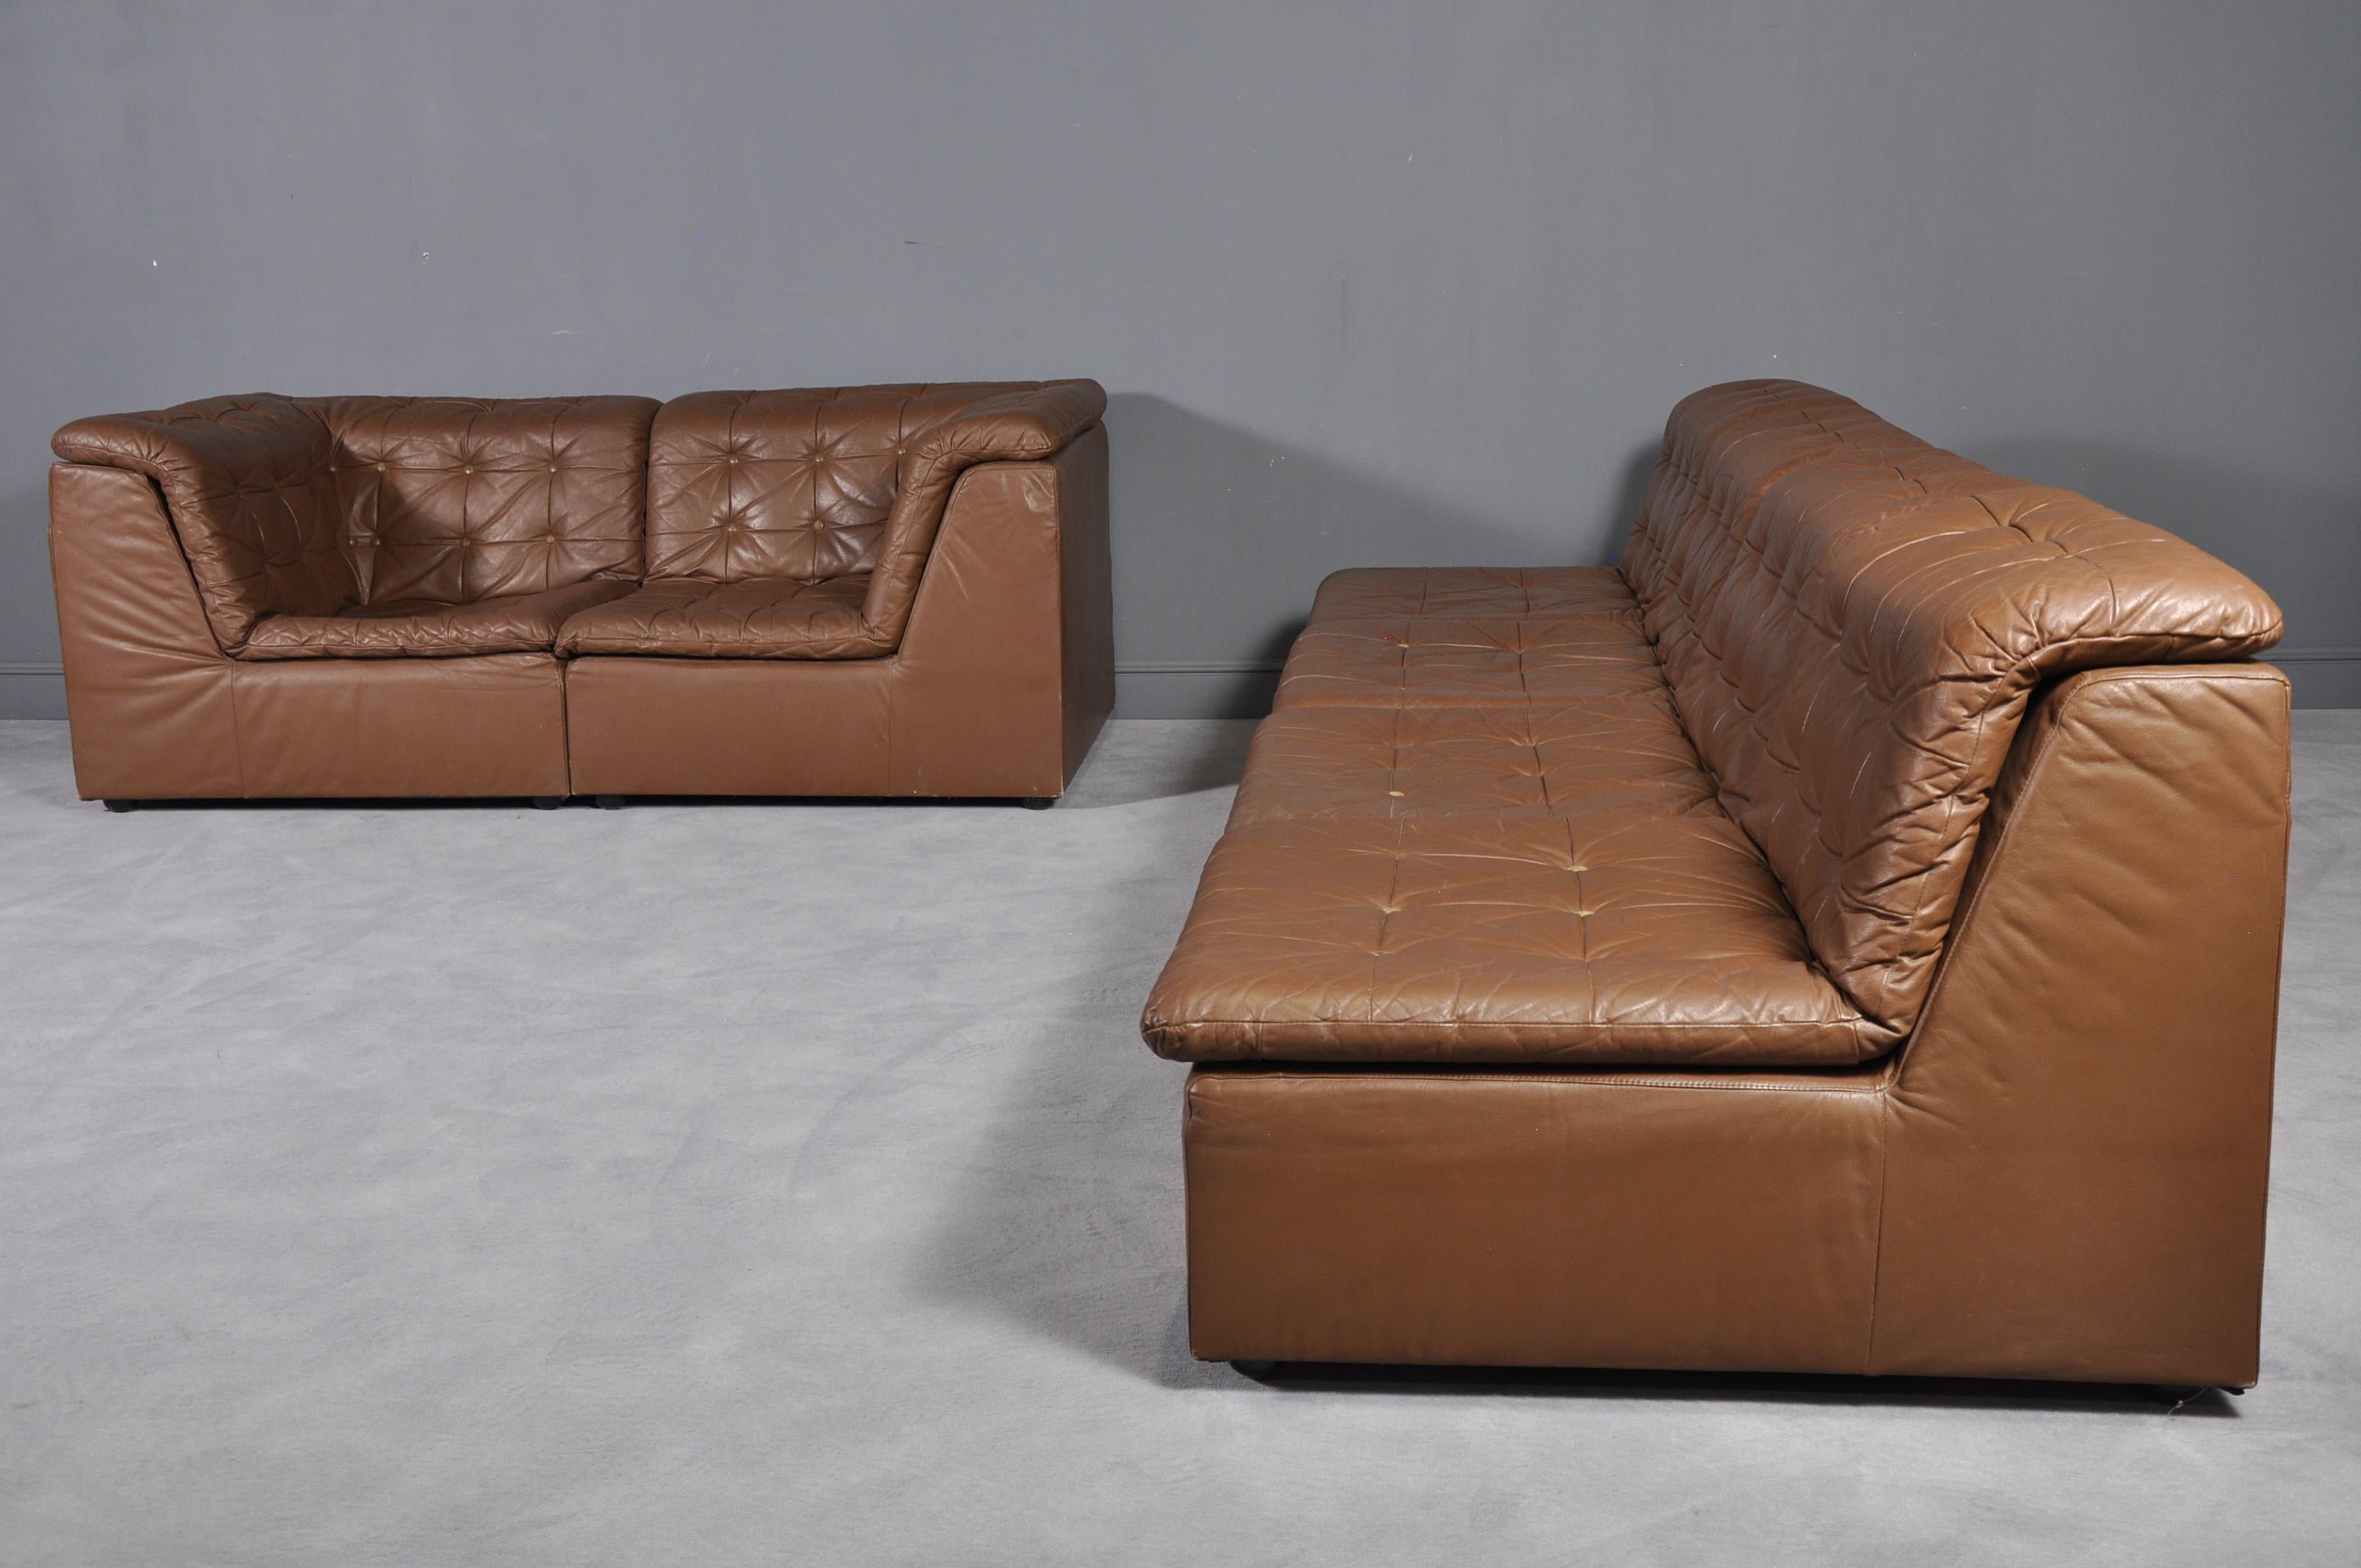 Cognac Leather “De Sede Style” Patchwork Modular Sofa from Laauser, Germany 1970 For Sale 1